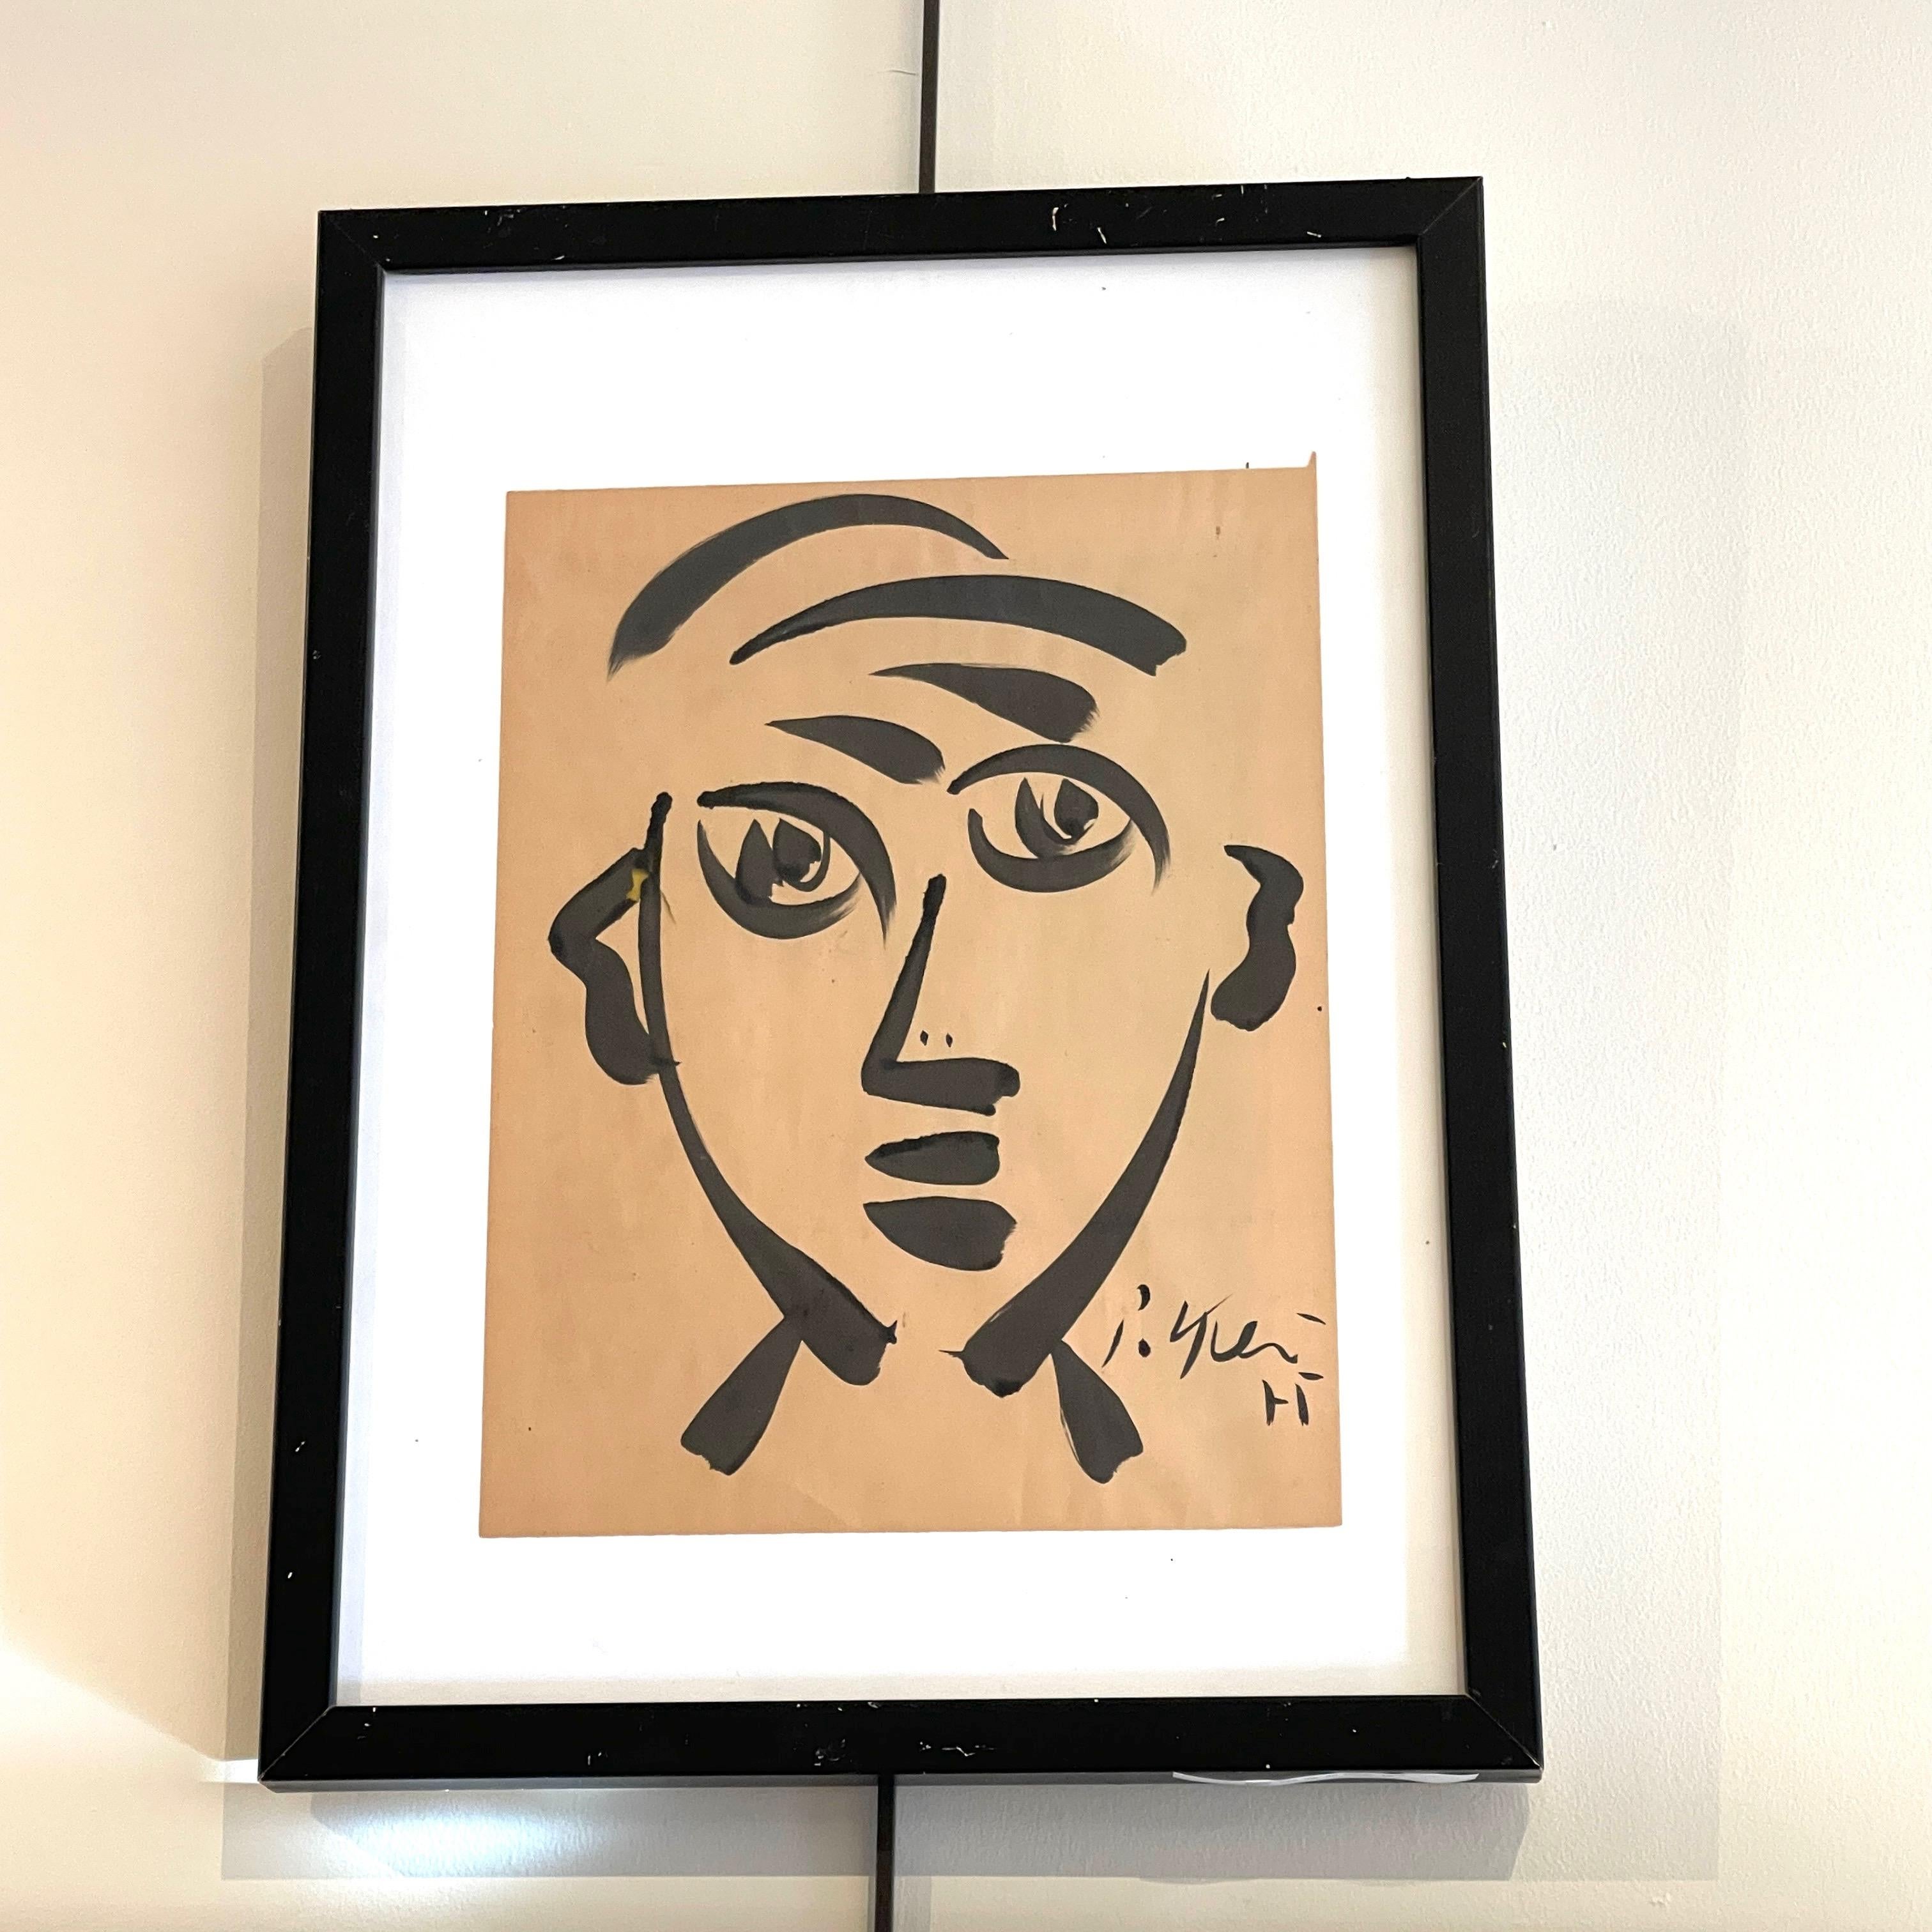 Early Ink on Paper Portrait in the Manner of Pablo Picasso - Abstract Expressionist Painting by Peter Keil